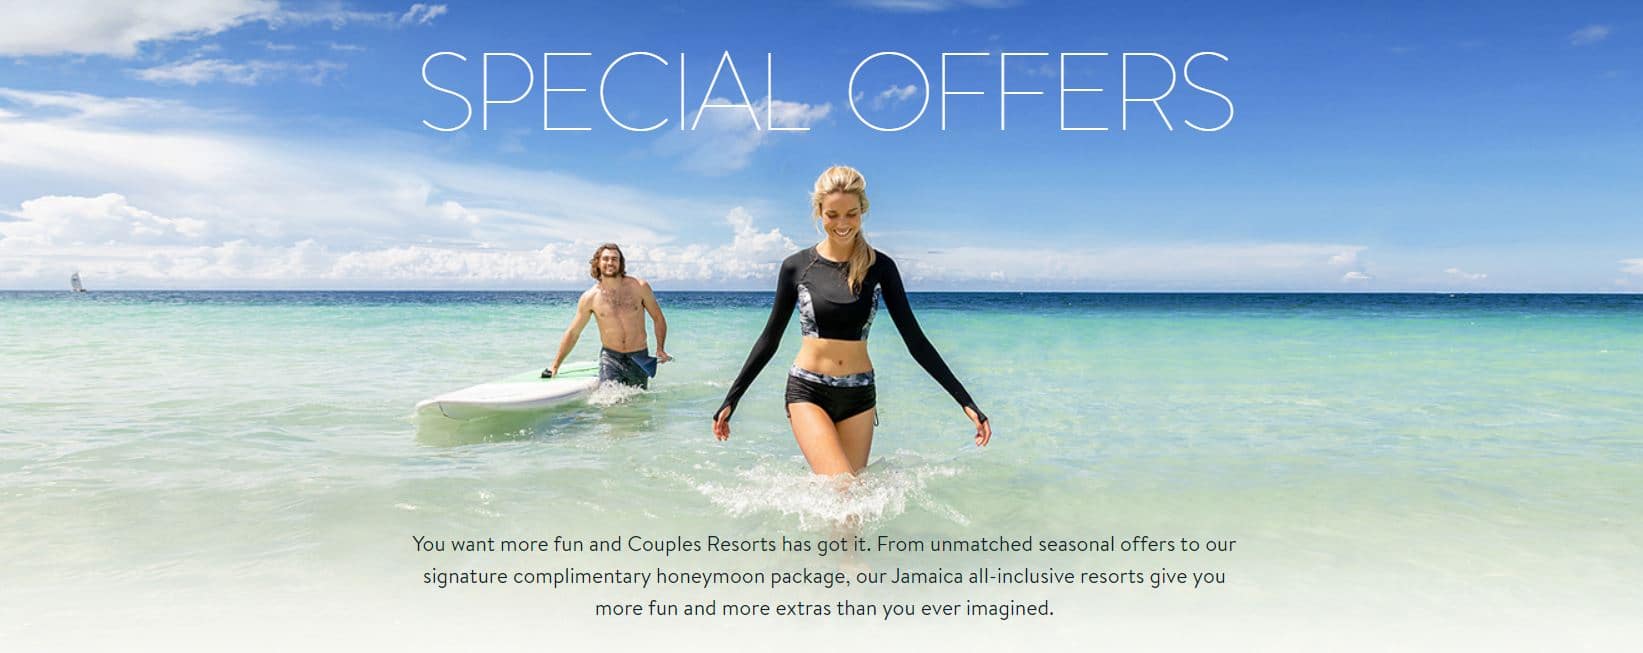 Current Specials at Couples All-Inclusive Honeymoon Resorts